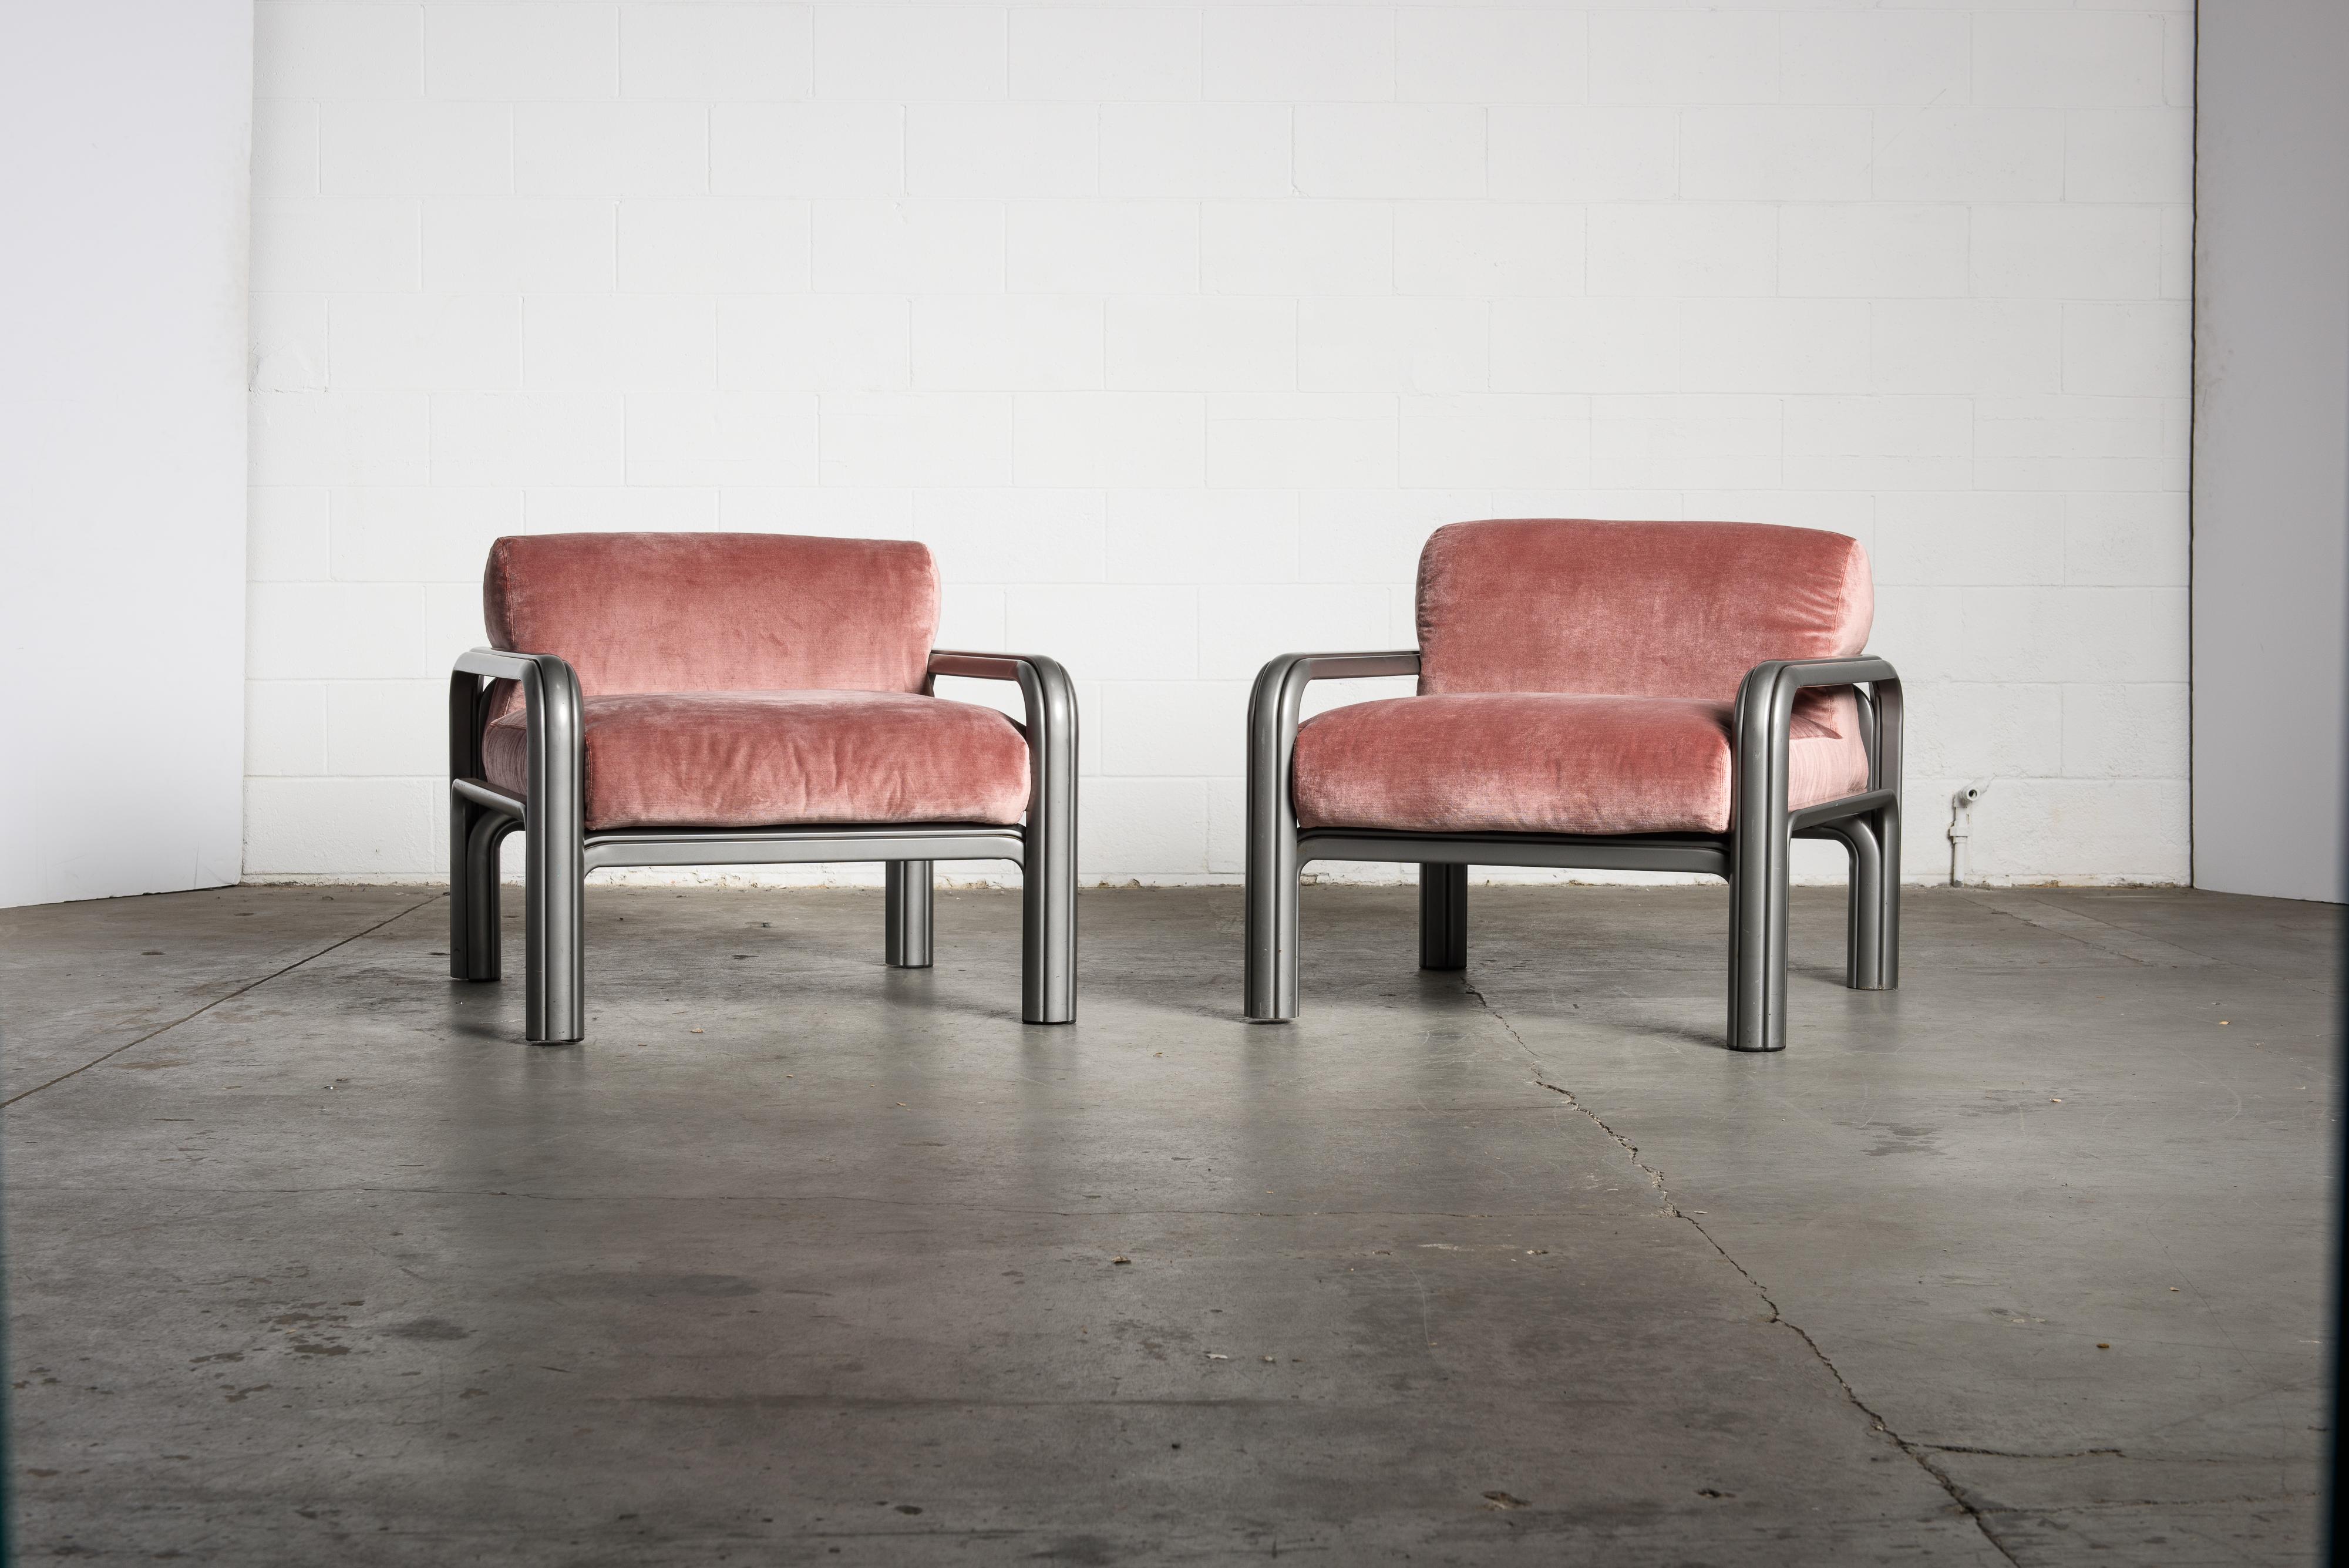 A fantastic pair of Gae Aulenti for Knoll International lounge chairs constructed of grey lacquered steel frames with pink velvet cushions. In recent years Gae Aulenti's designs have soared in demand as interior designers are now recognizing her